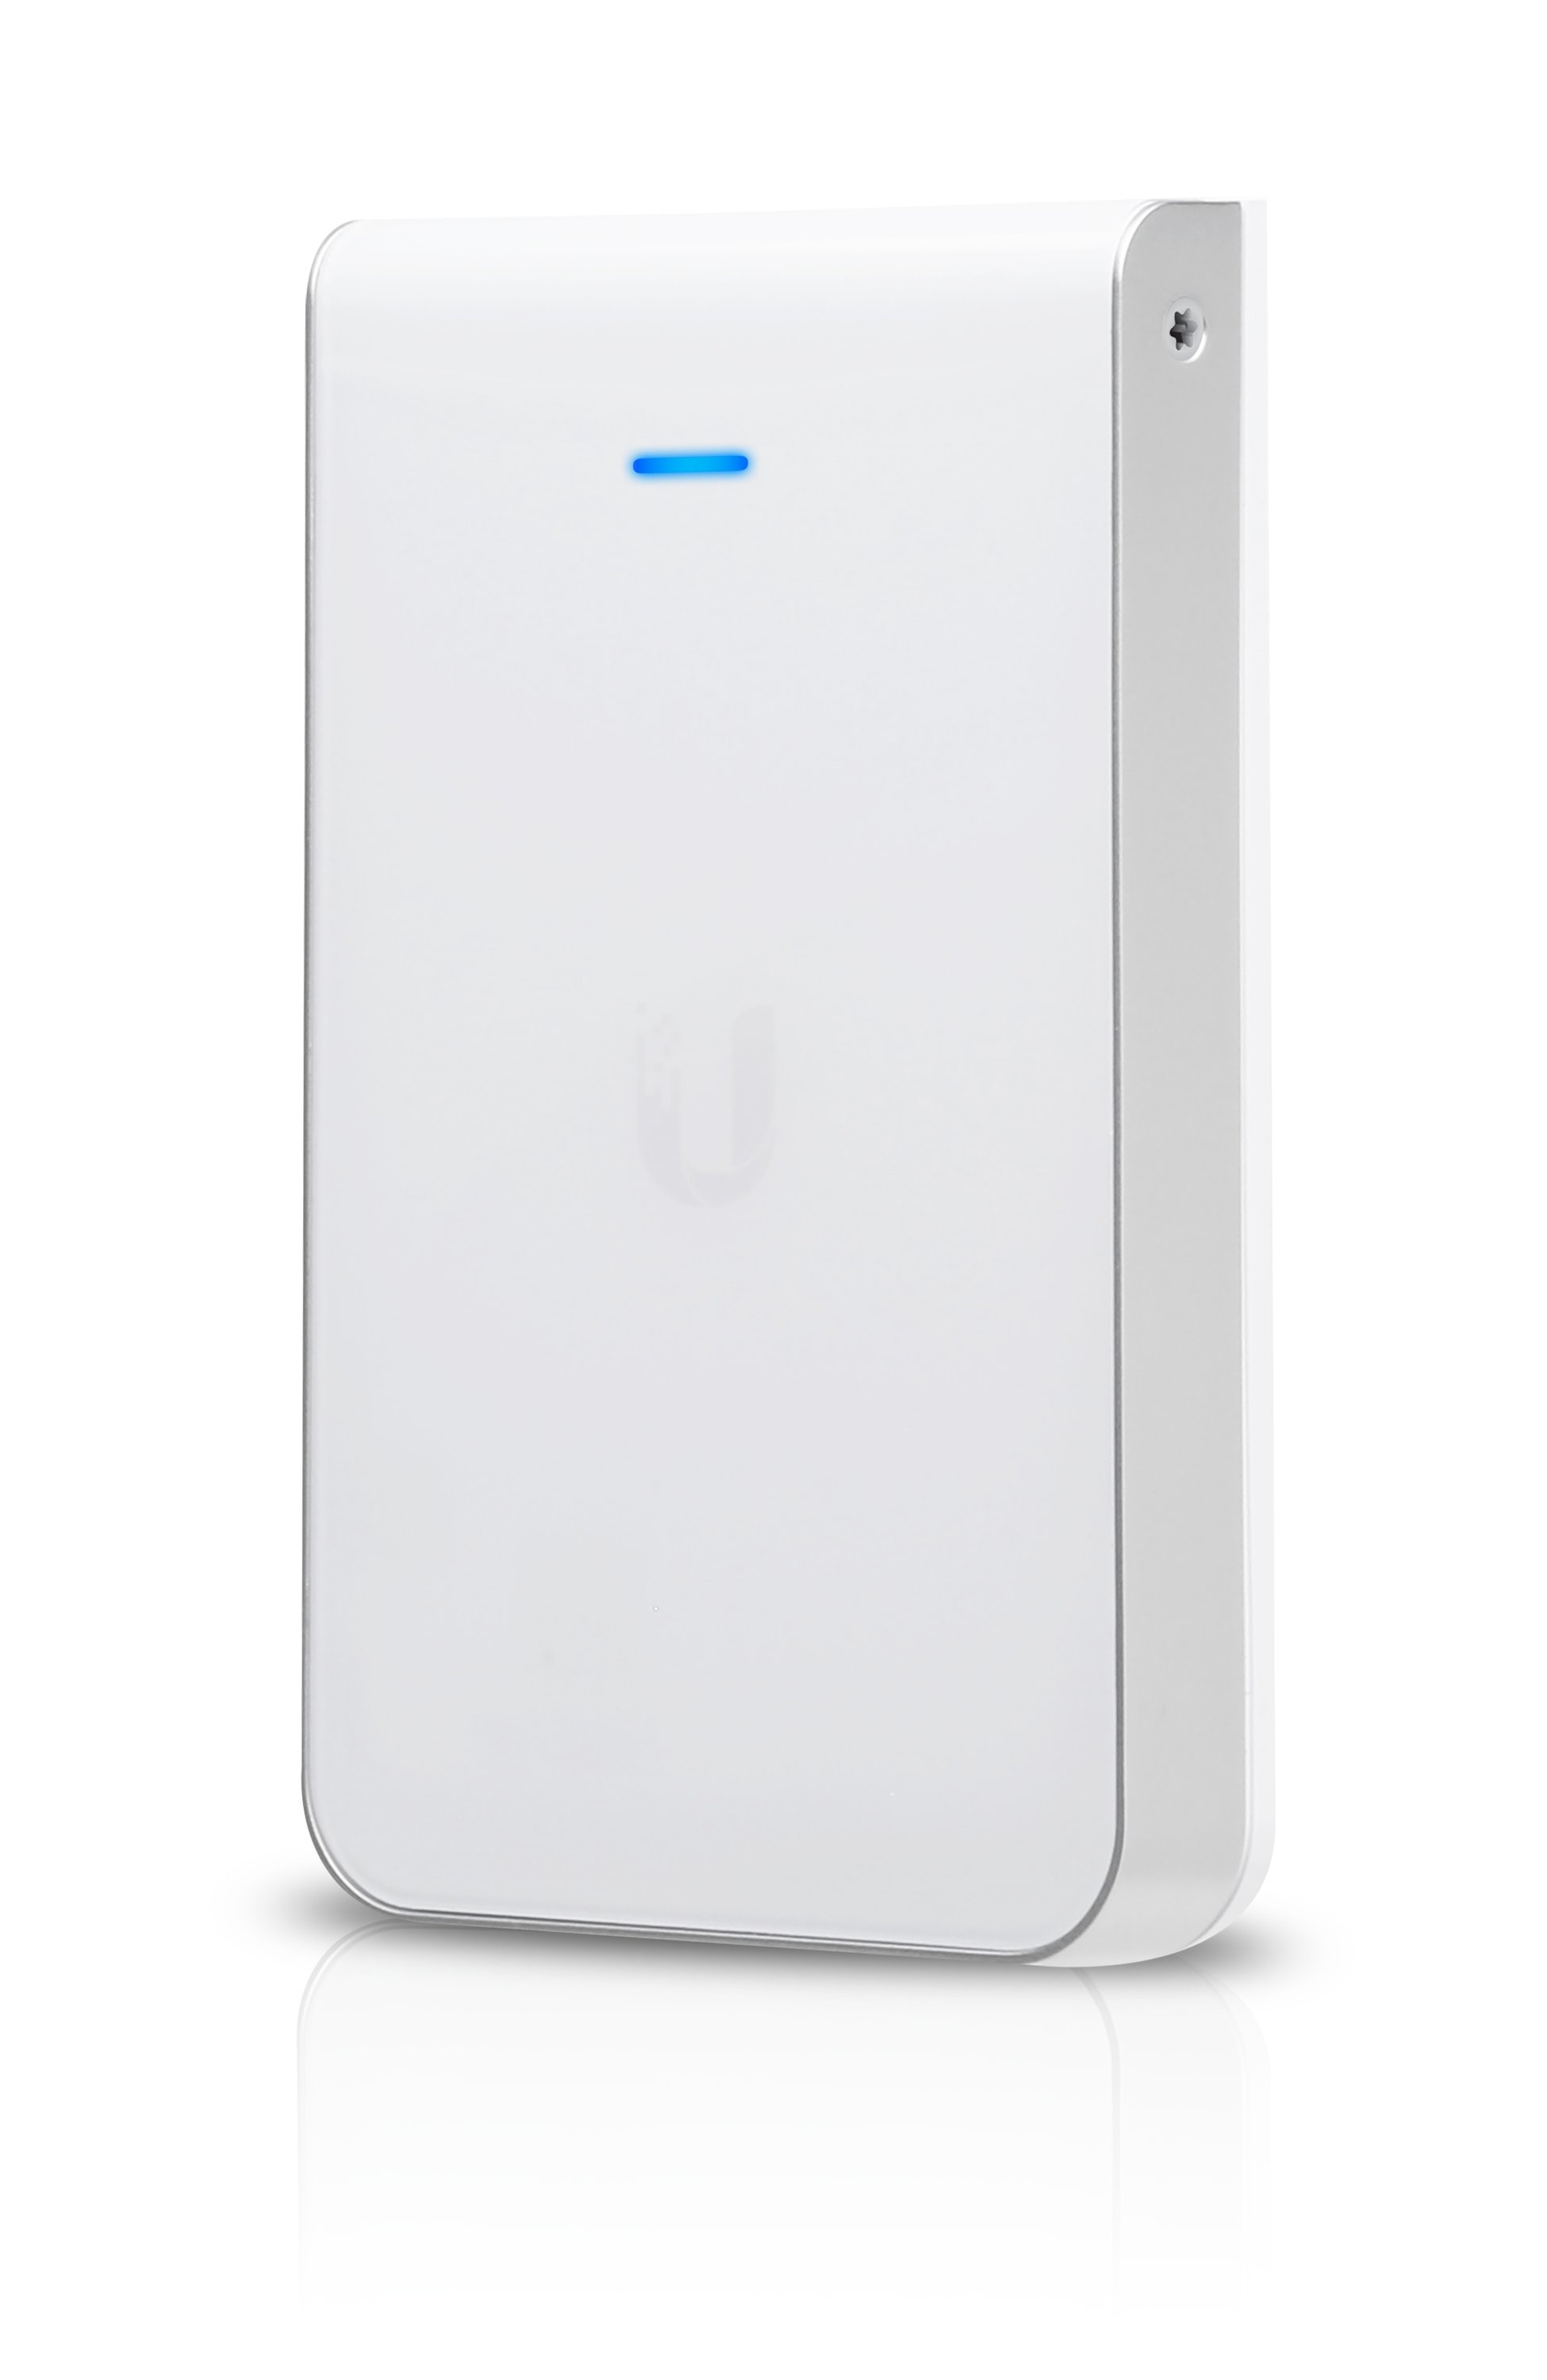 Ubiquiti UniFi UAP-IW-HD In-Wall Access Point Front Angle Image